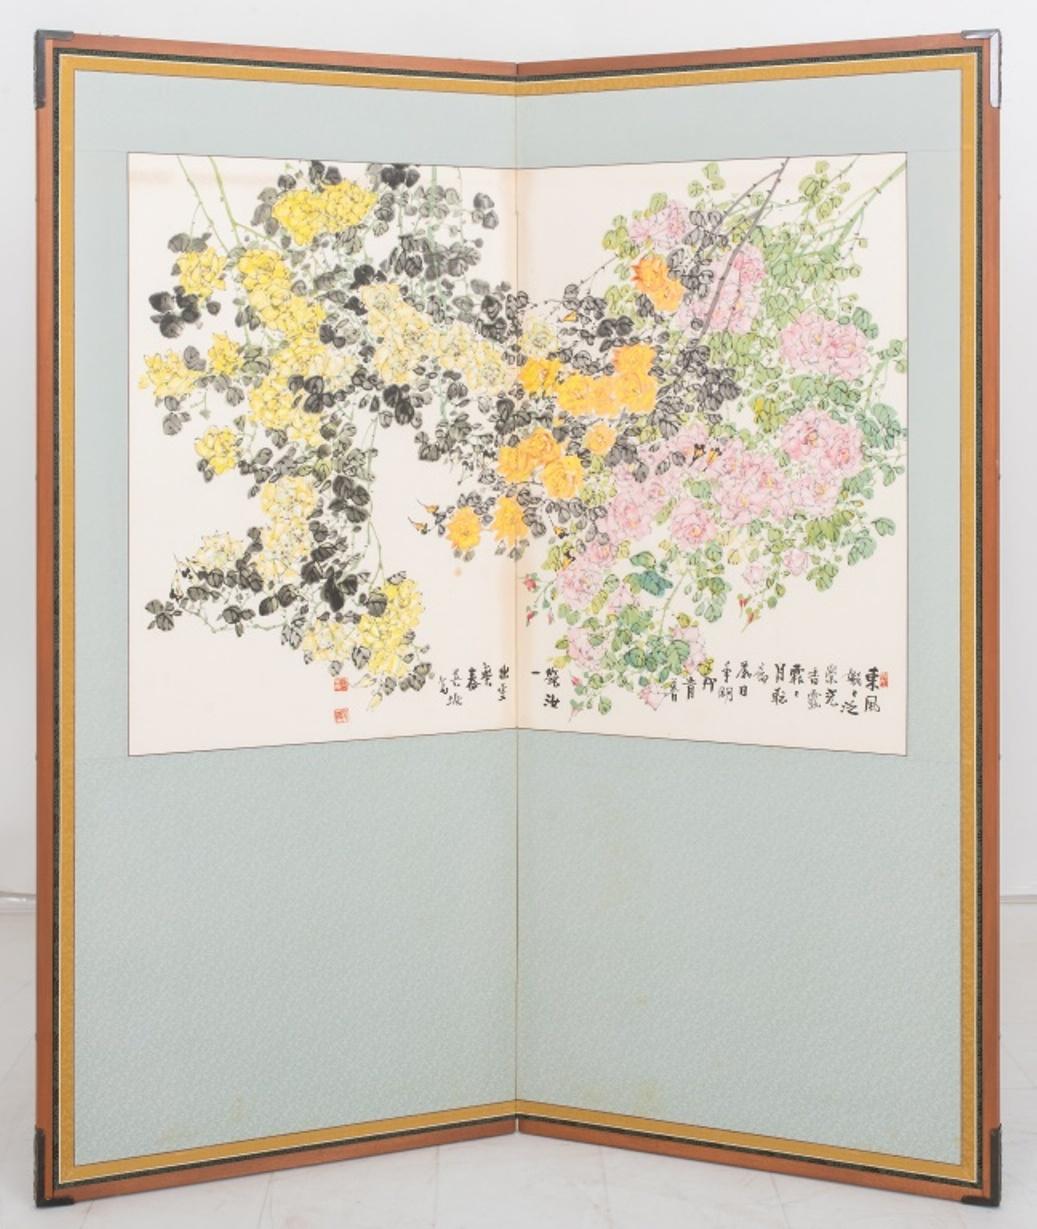 Japanese ink paintings mounted as two two-panel screens, one with images of spring flowers and calligraphic inscriptions, the other with images of summer flowers and calligraphic inscription. Small tear to image.

Dimensions: Each: 49.5